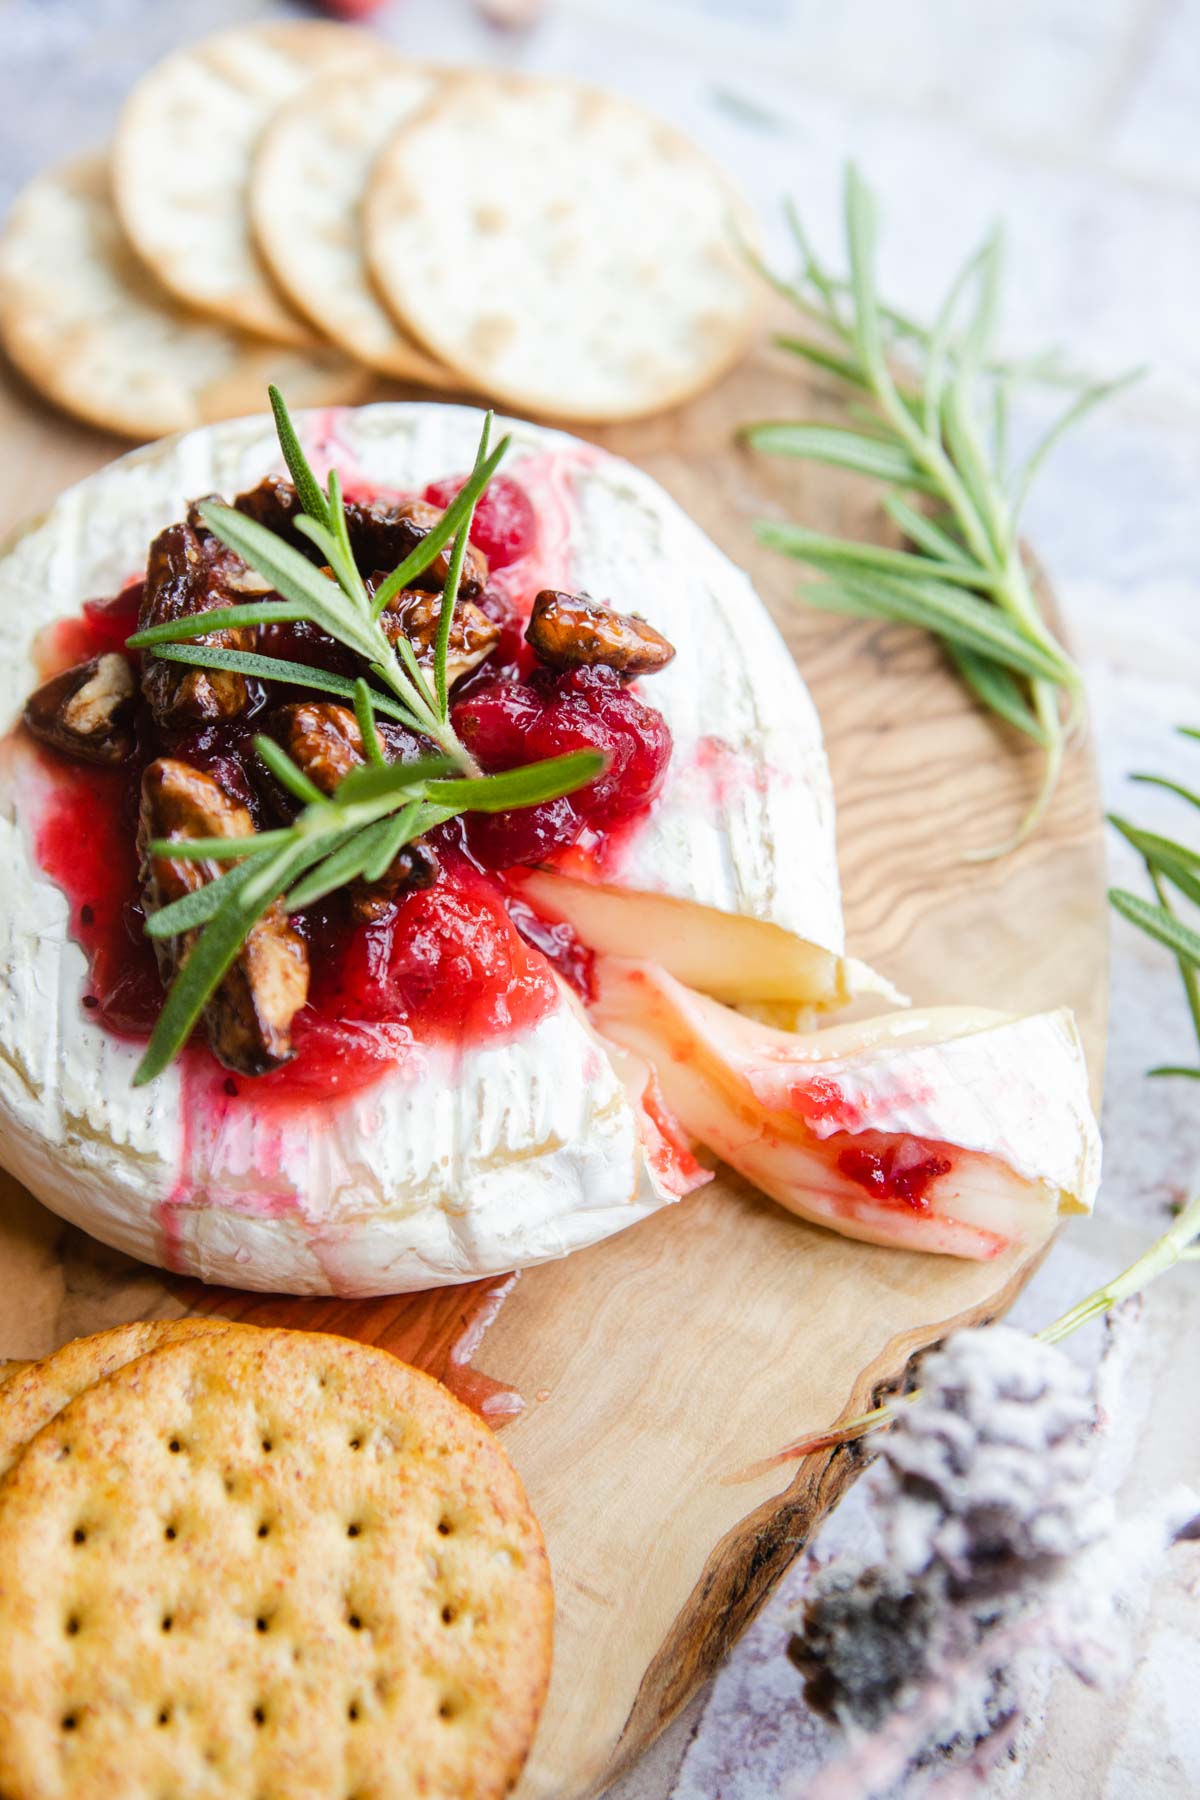 rosemary and cranberry sauce on a wheel of cheese